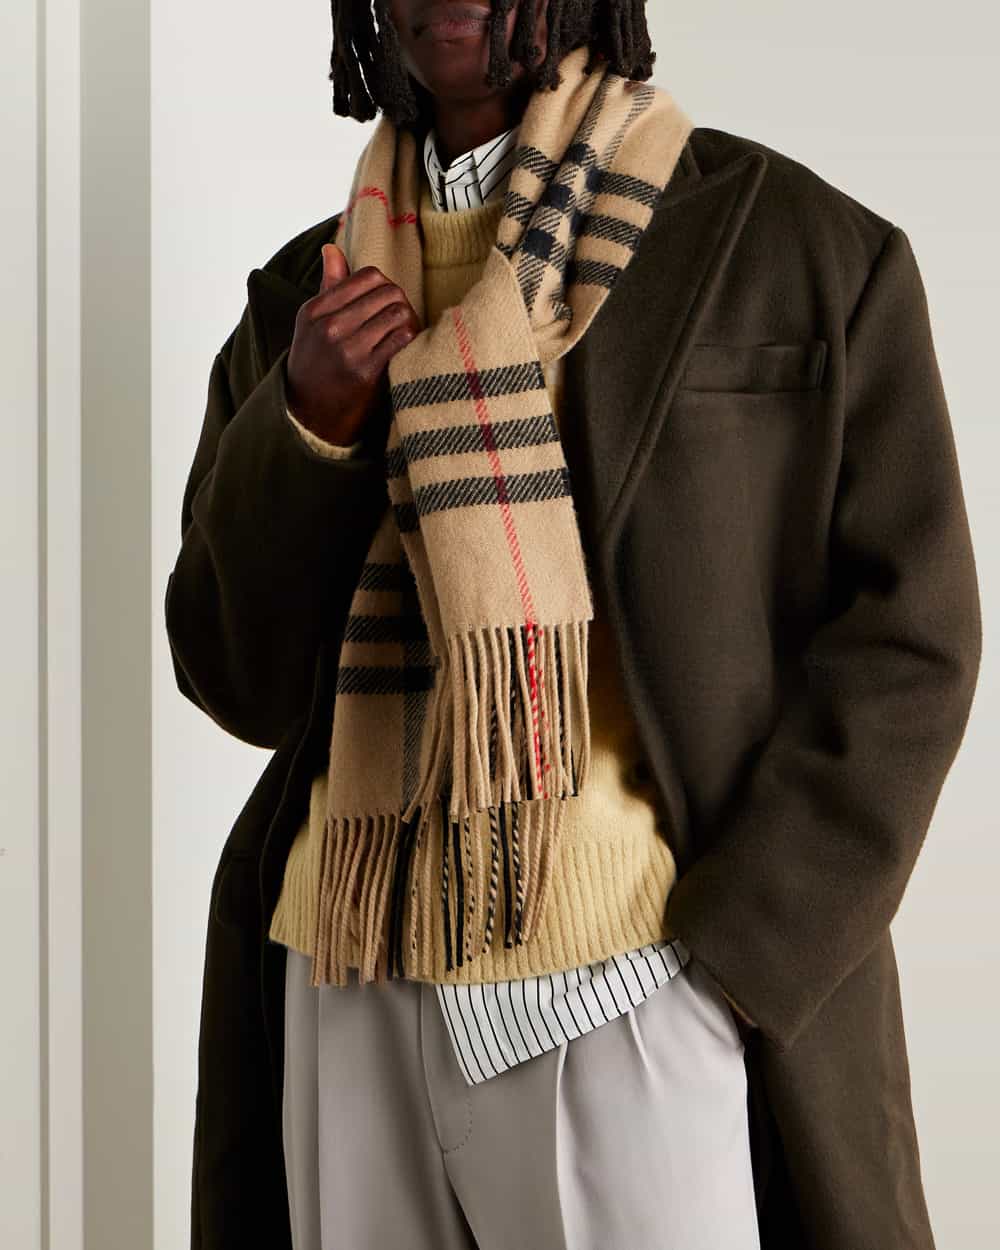 Black man wearing grey pants, white stripe shirt, yellow sweater, olive green overcoat and Burberry beige check scarf